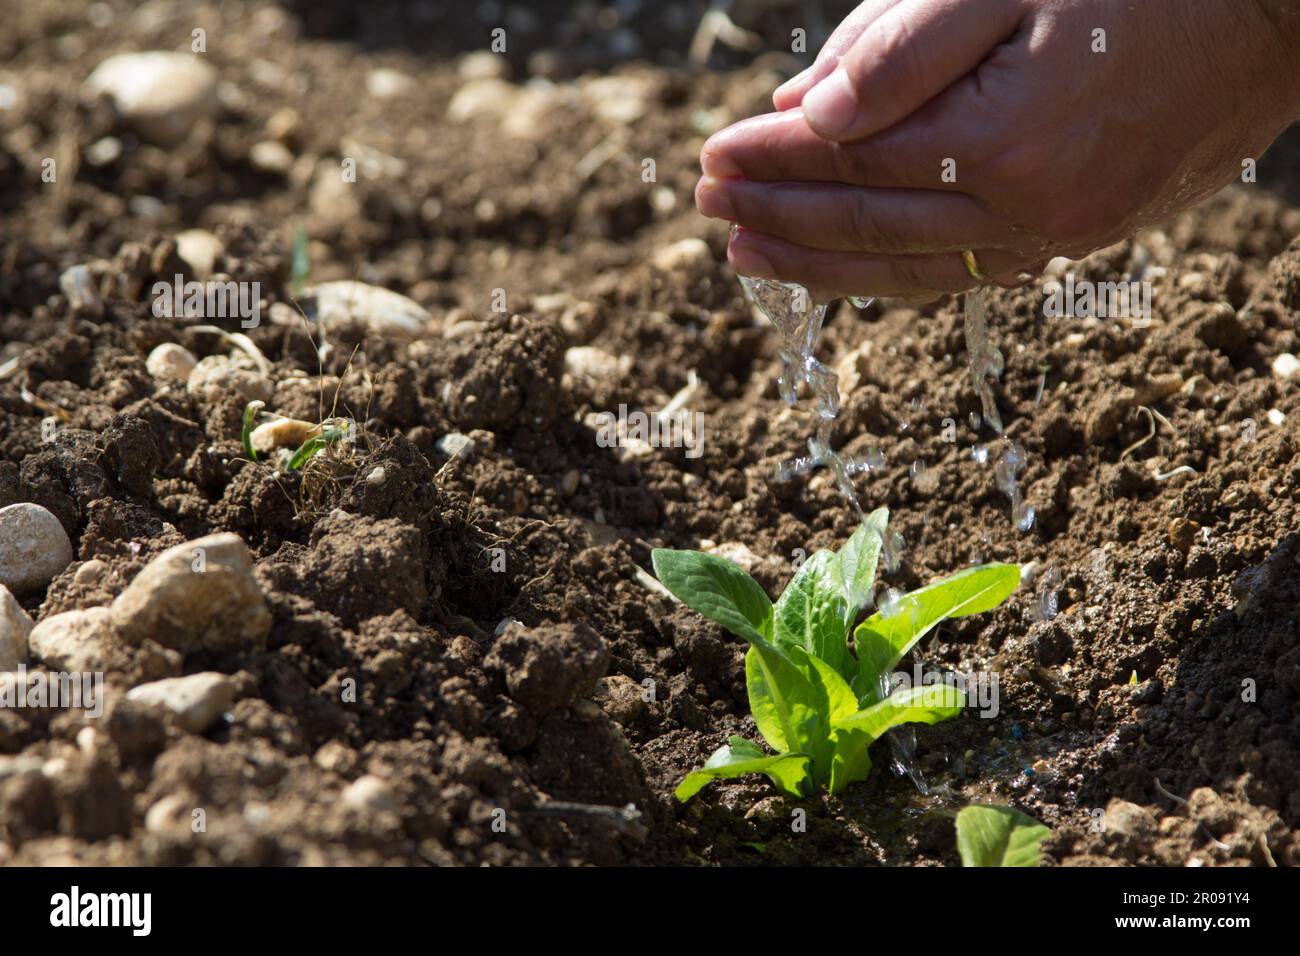 Image of a man's hands pouring water on a small seedling. Reference to nourishment and growth. Stock Photo